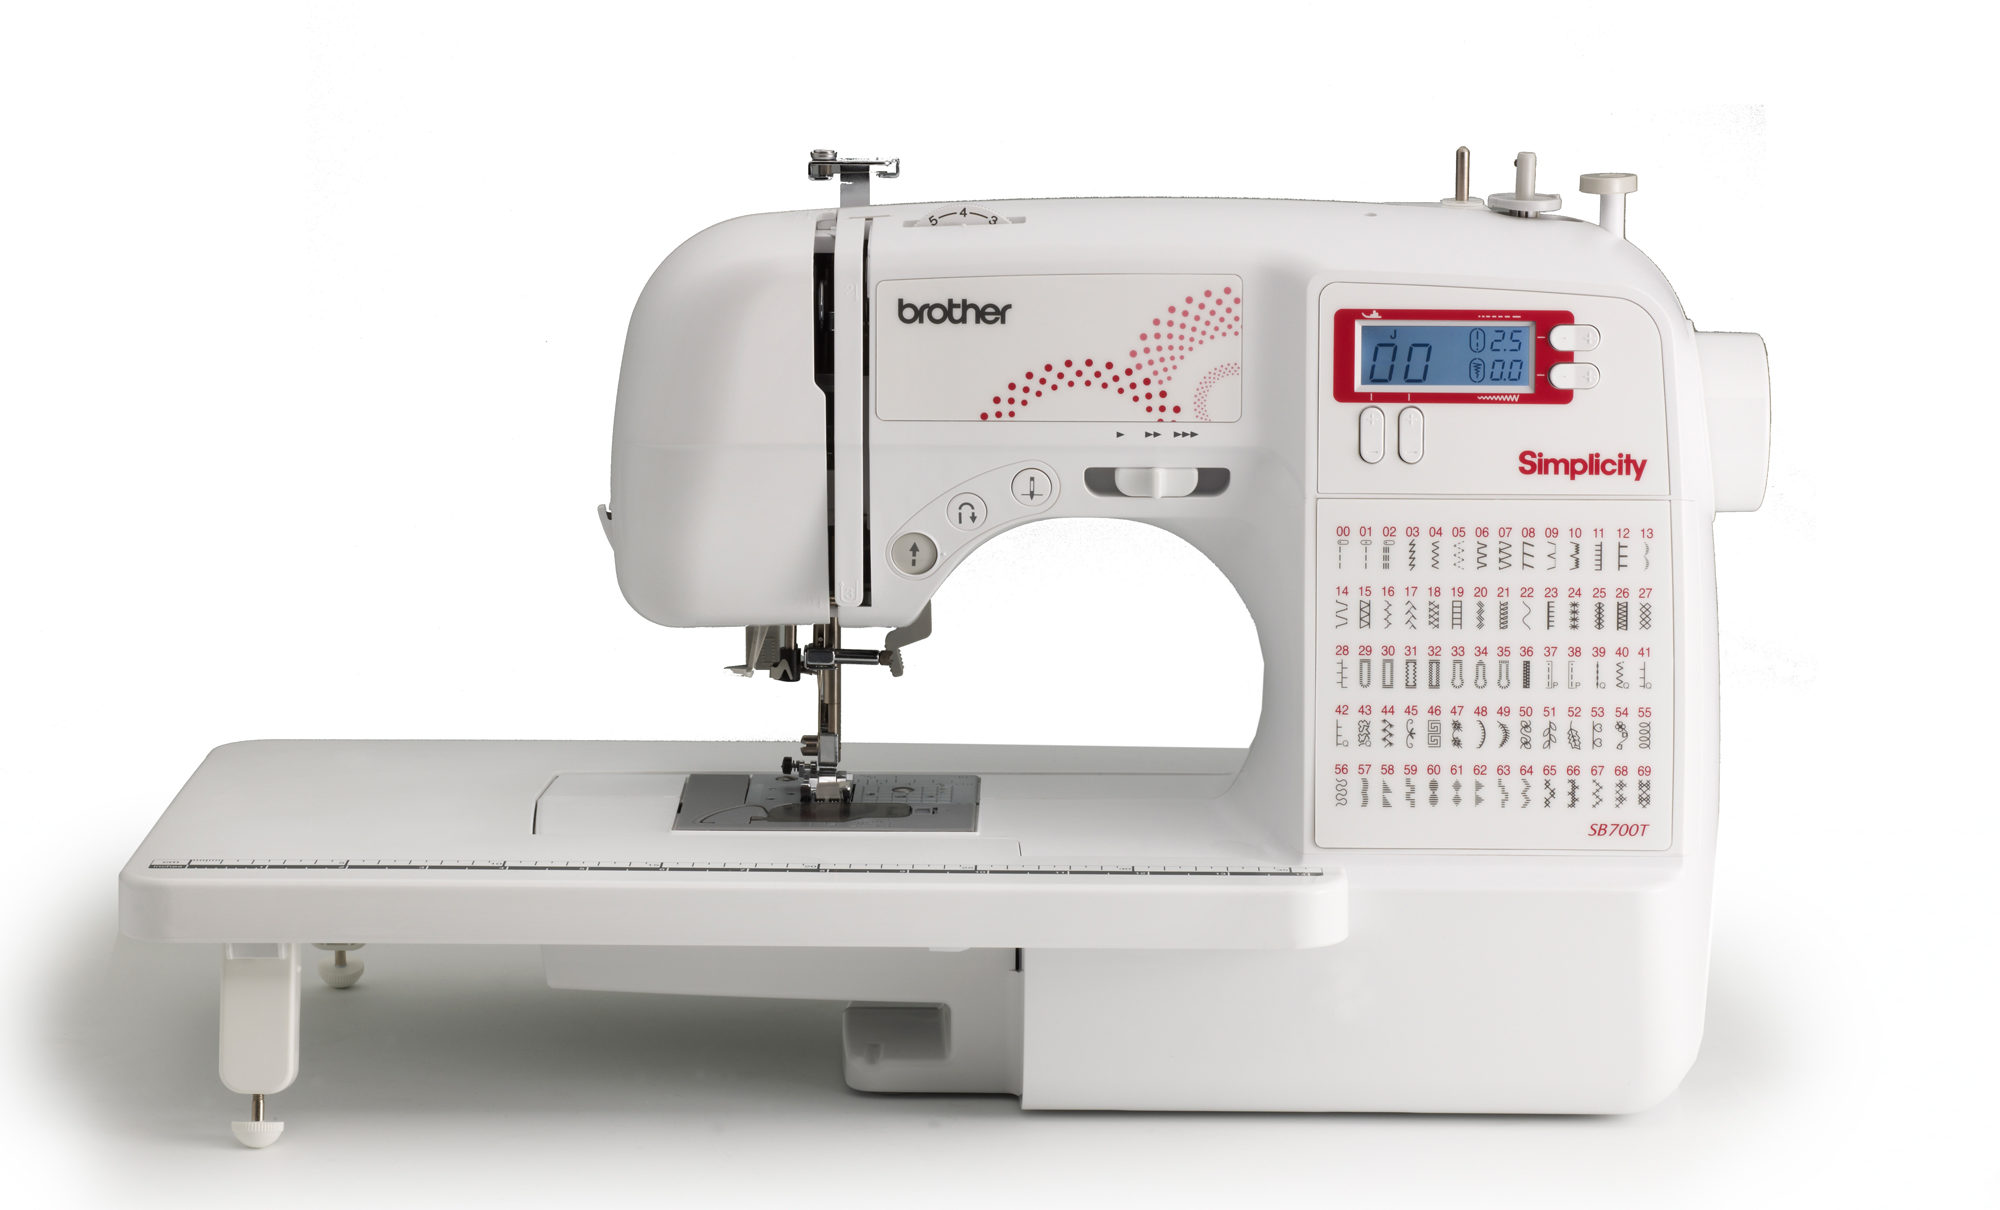 Brother-Simplicity-Limited-Edition-SB700T-Sewing-Machine